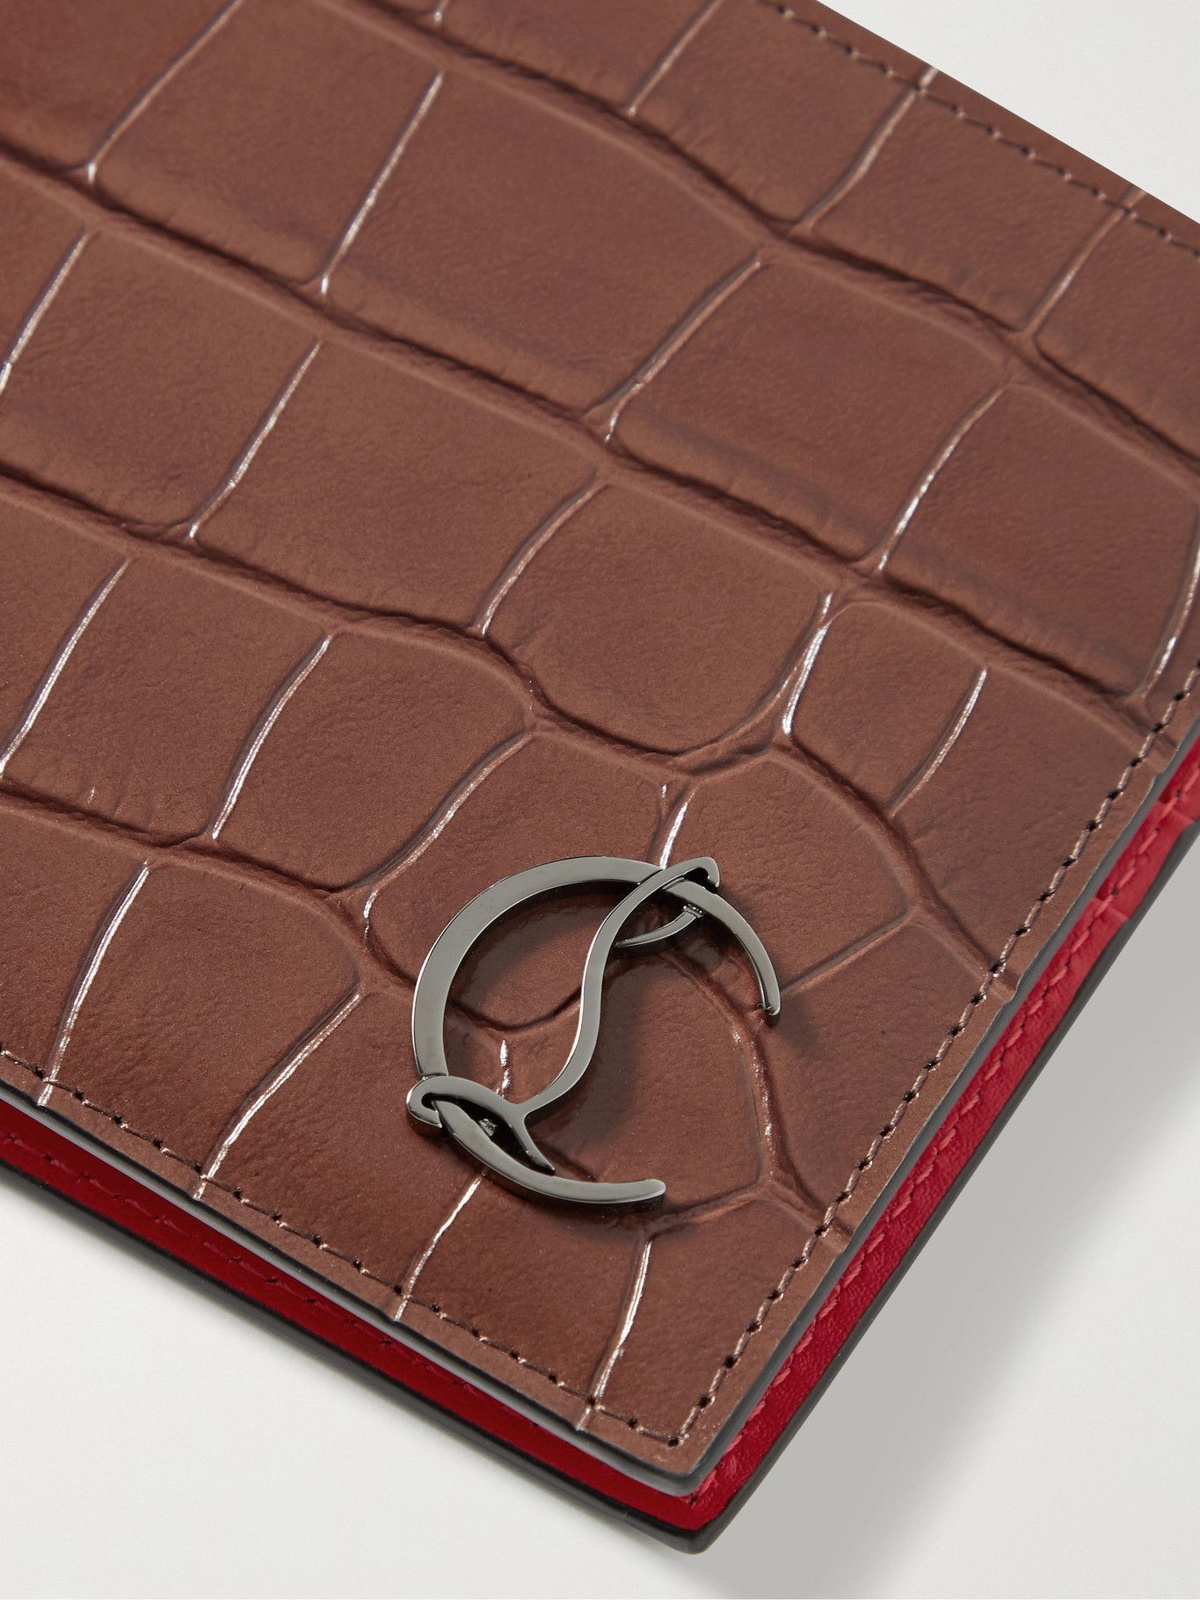 Coolcard Leather Wallet in Brown - Christian Louboutin